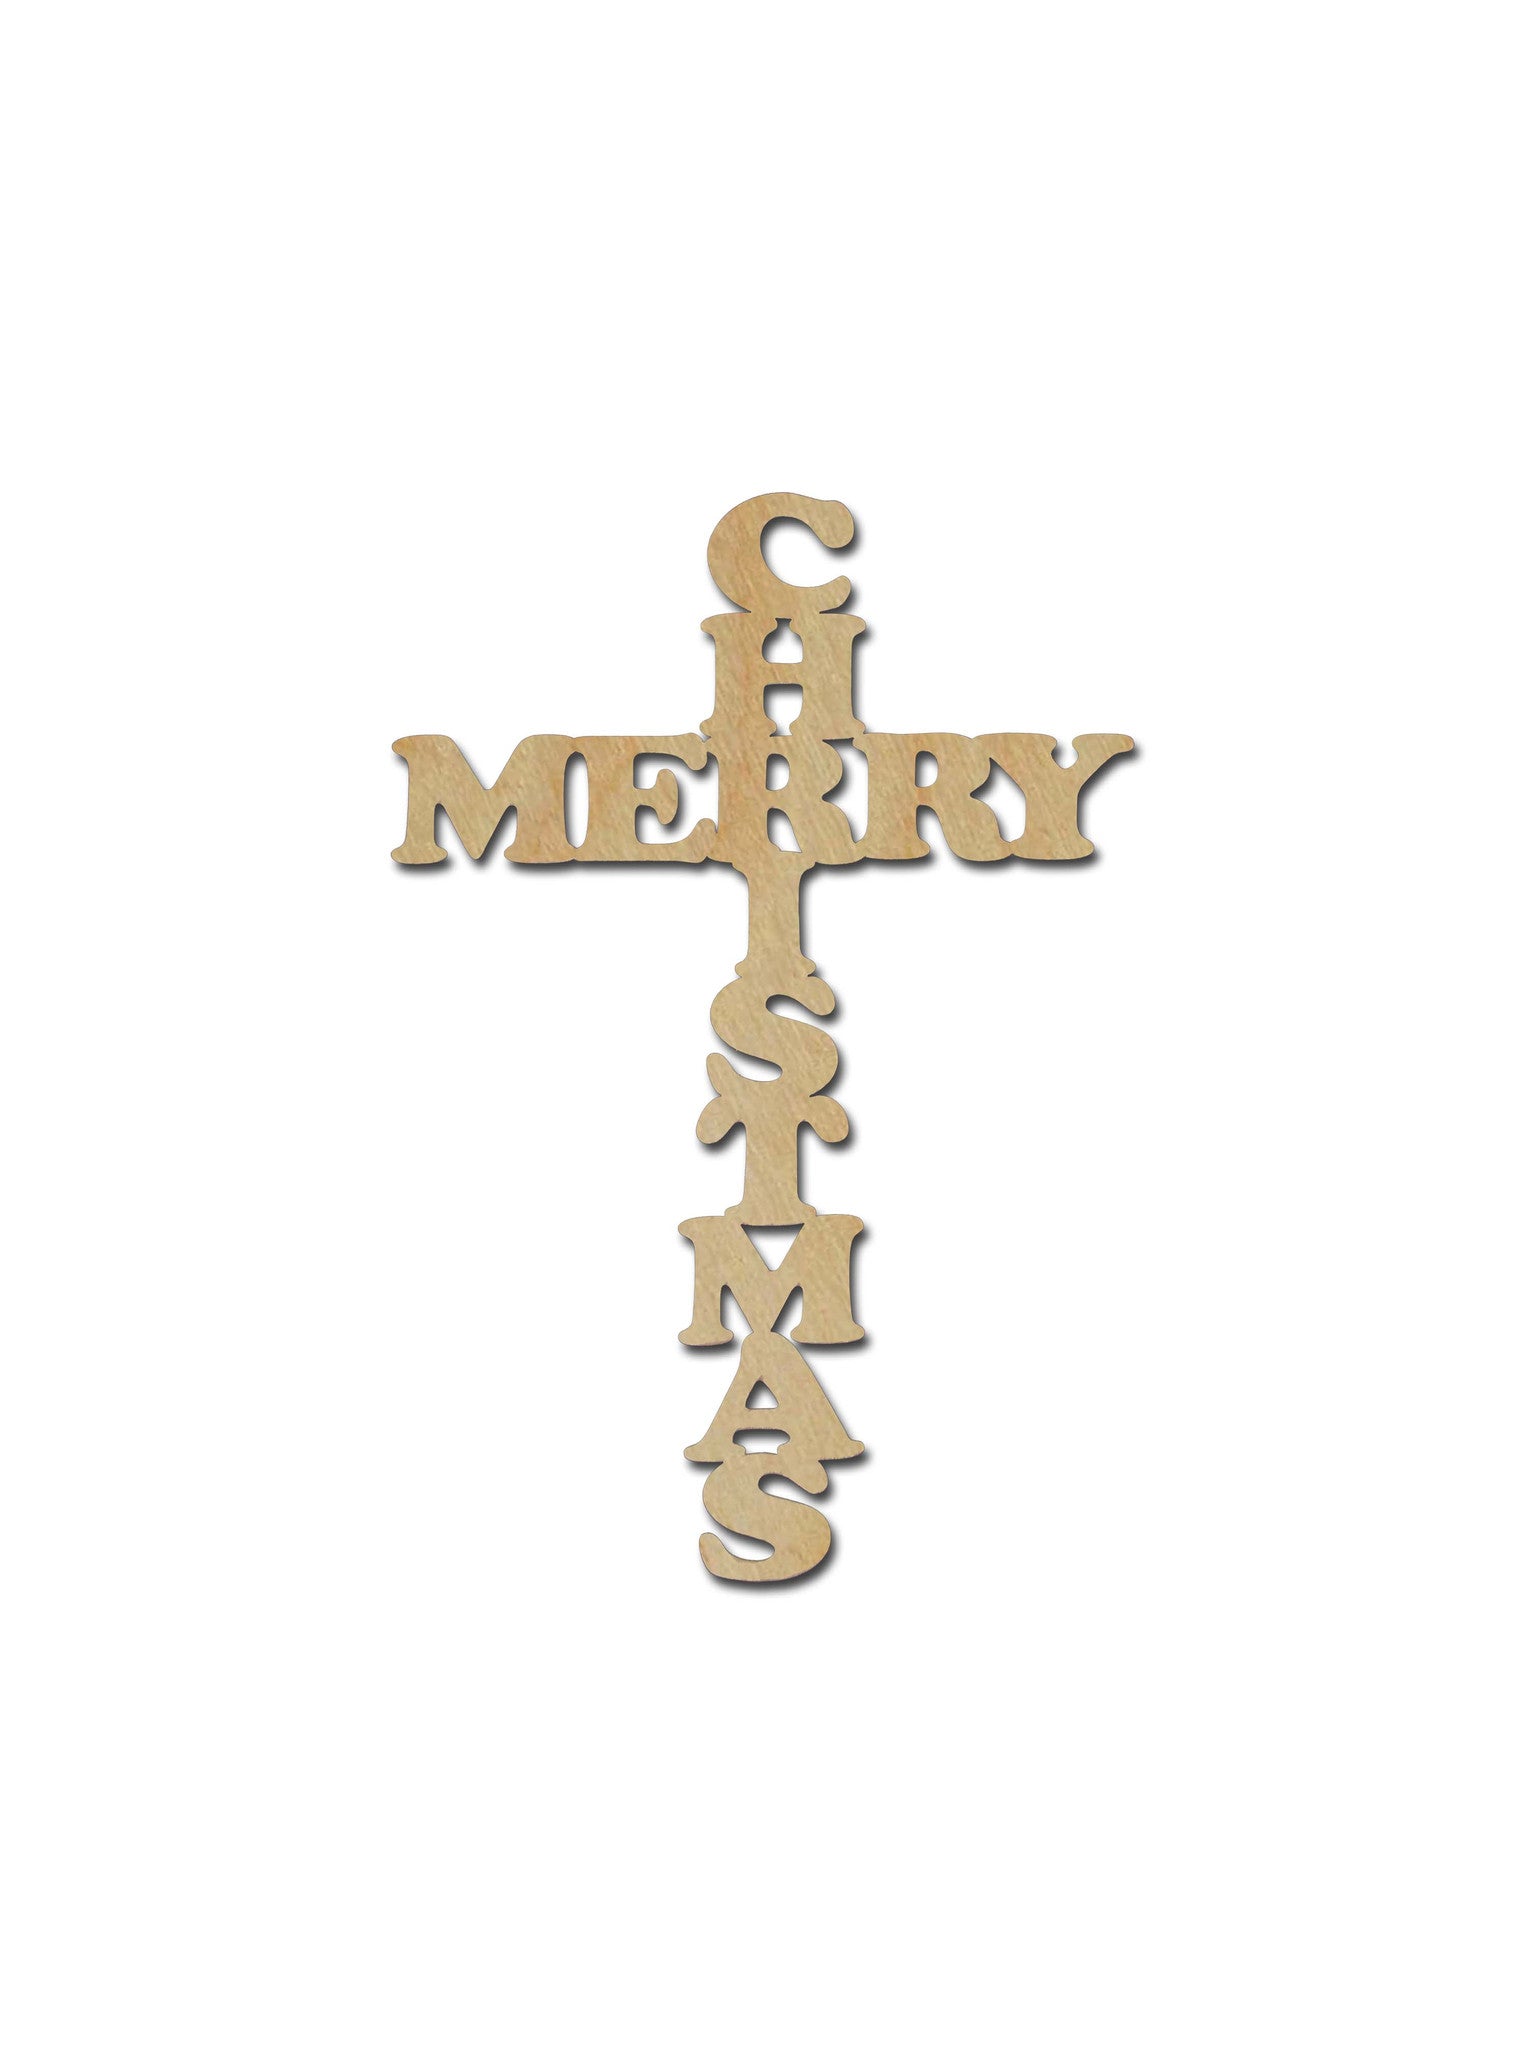 Merry Christmas unfinished wood cross